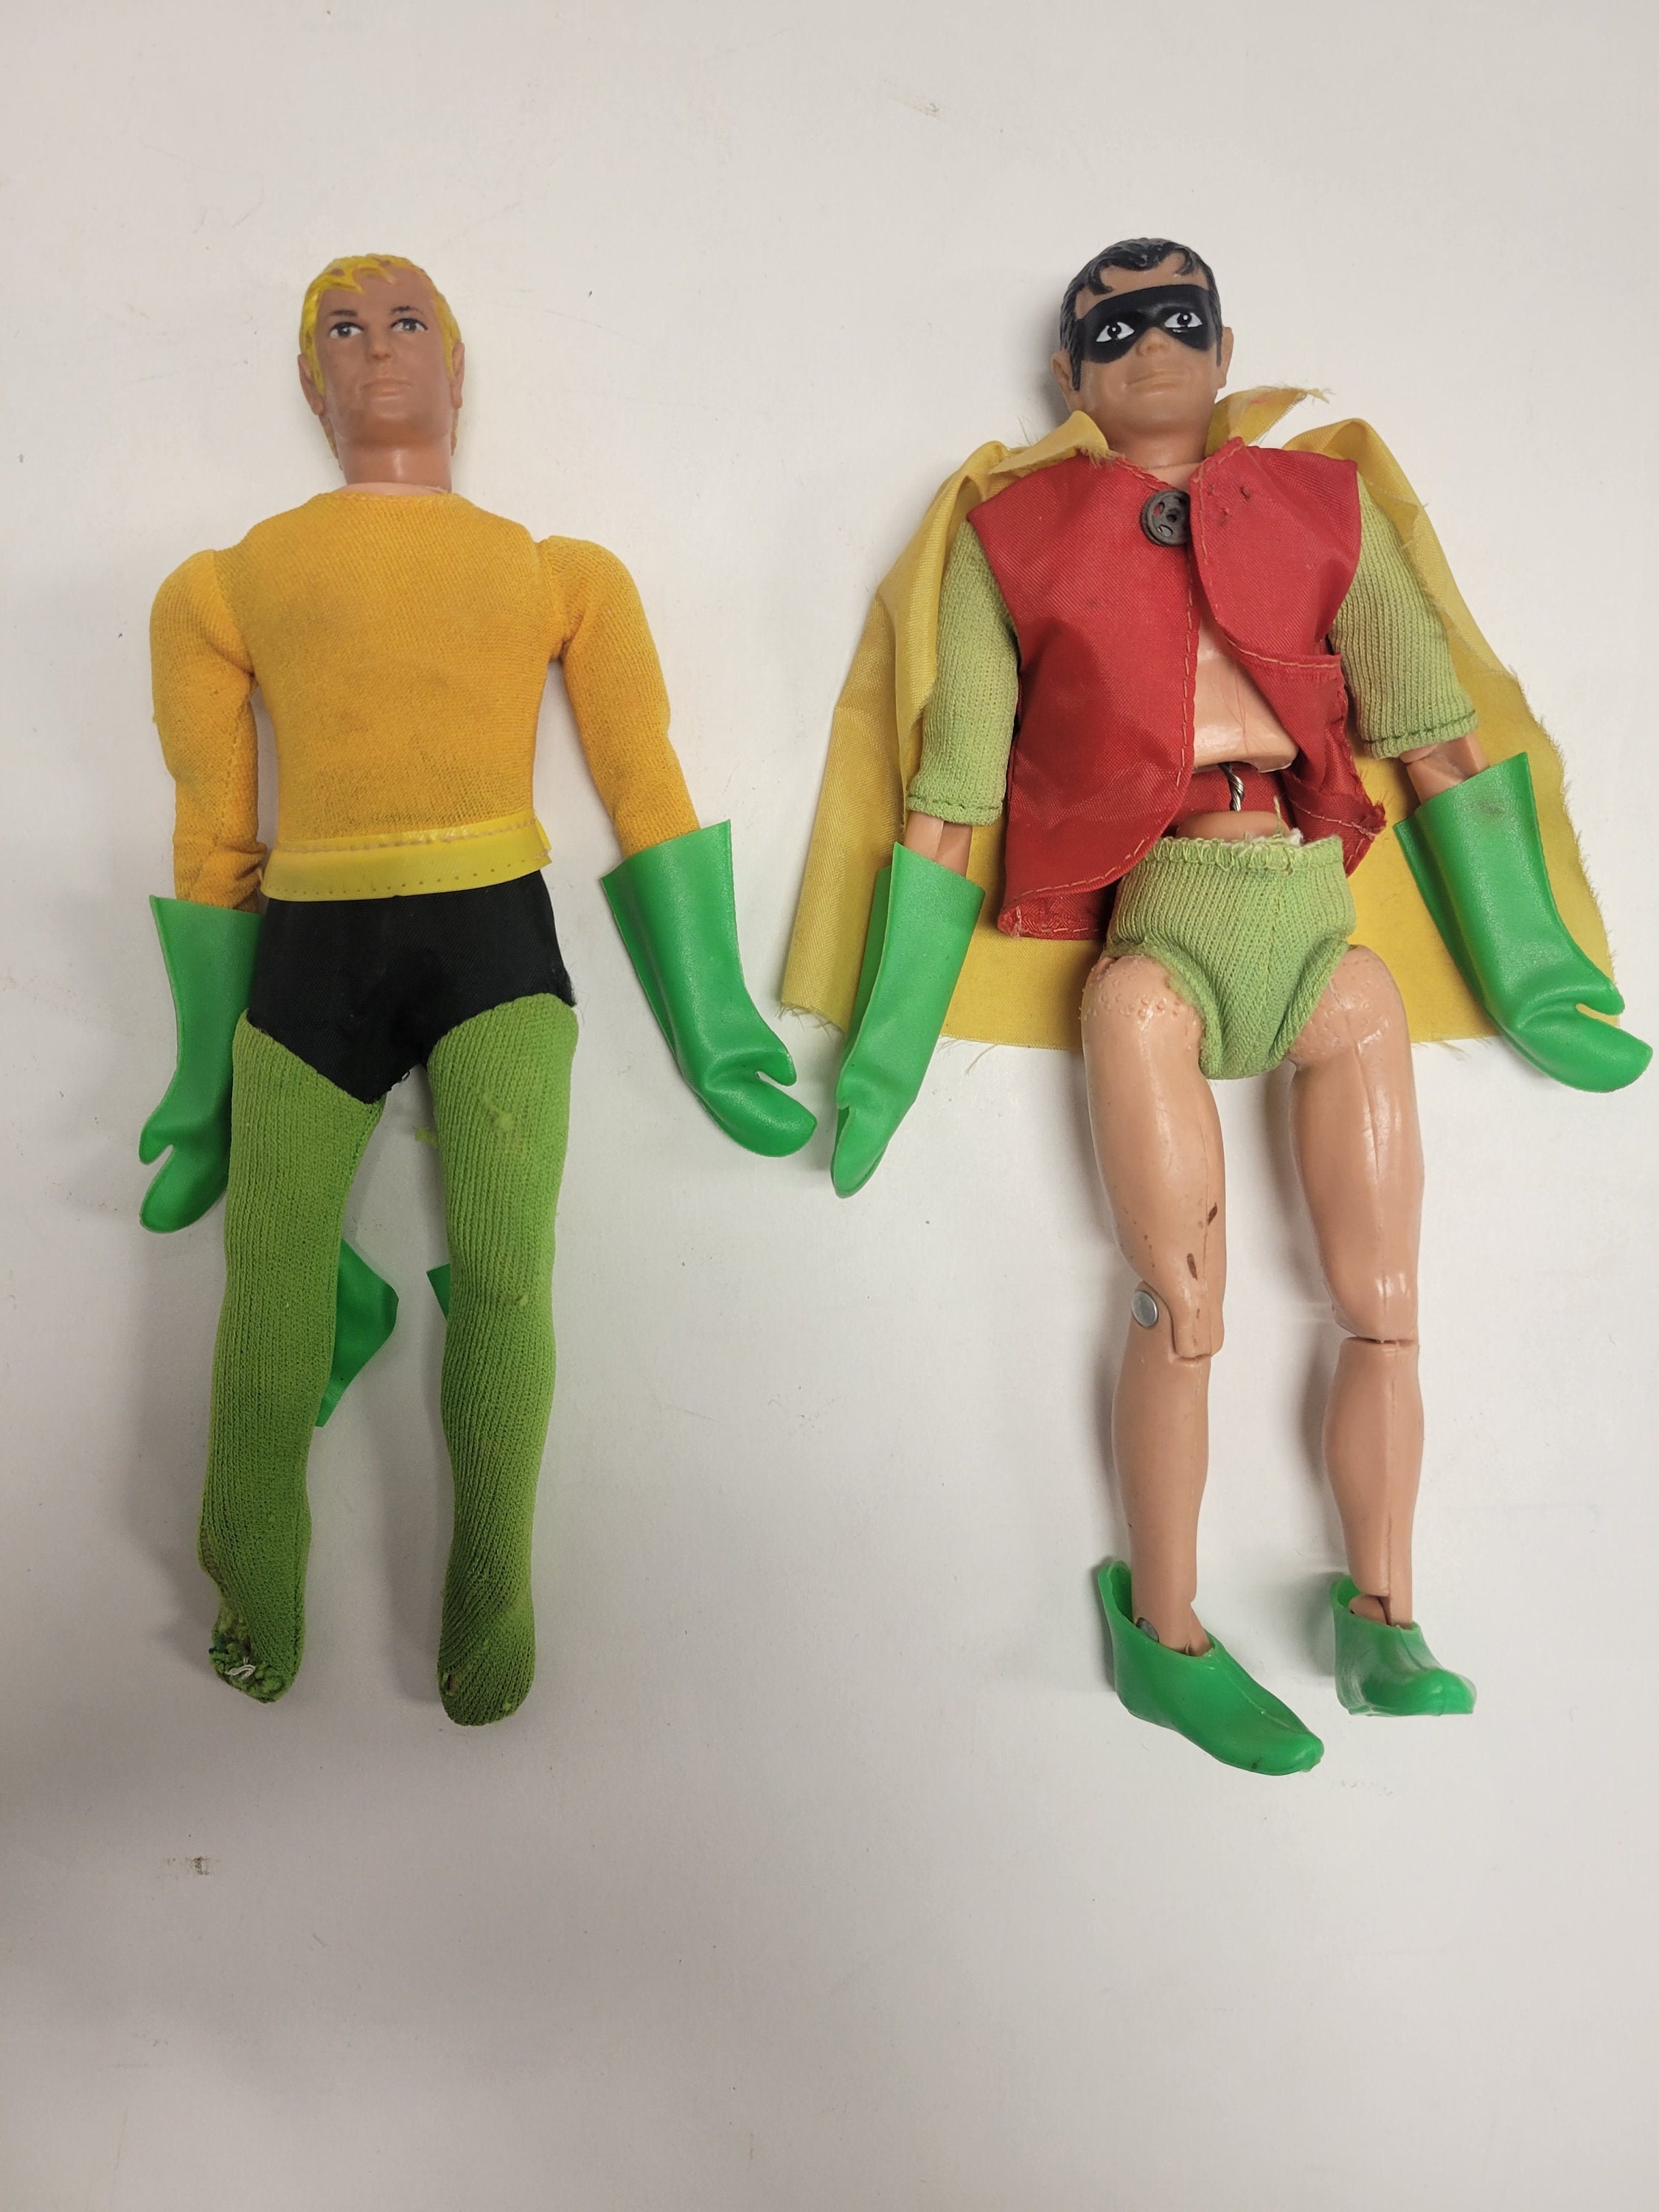 Lot of 2 Vintage Original and Early Mego Type 1 WGSH 8